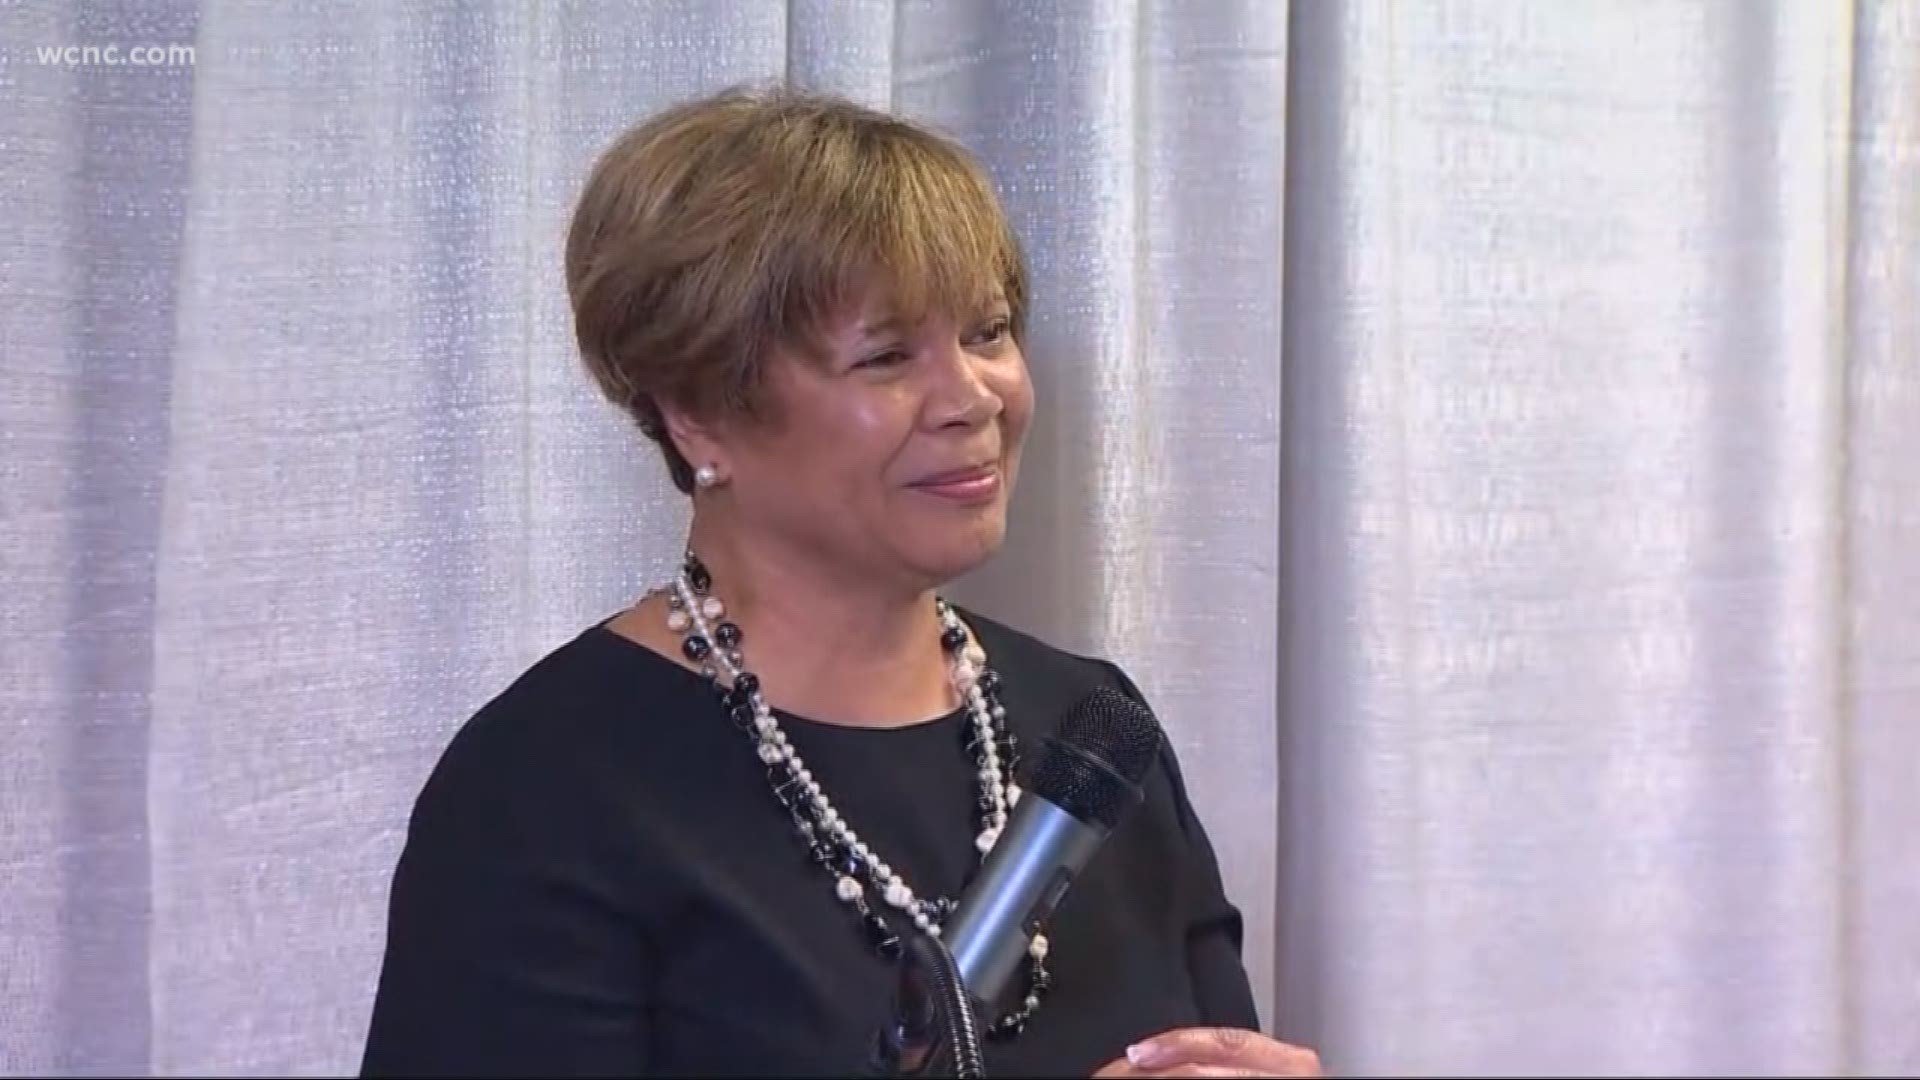 After a historic win Tuesday, mayor-elect Vi Lyles laid out her plans for the city.